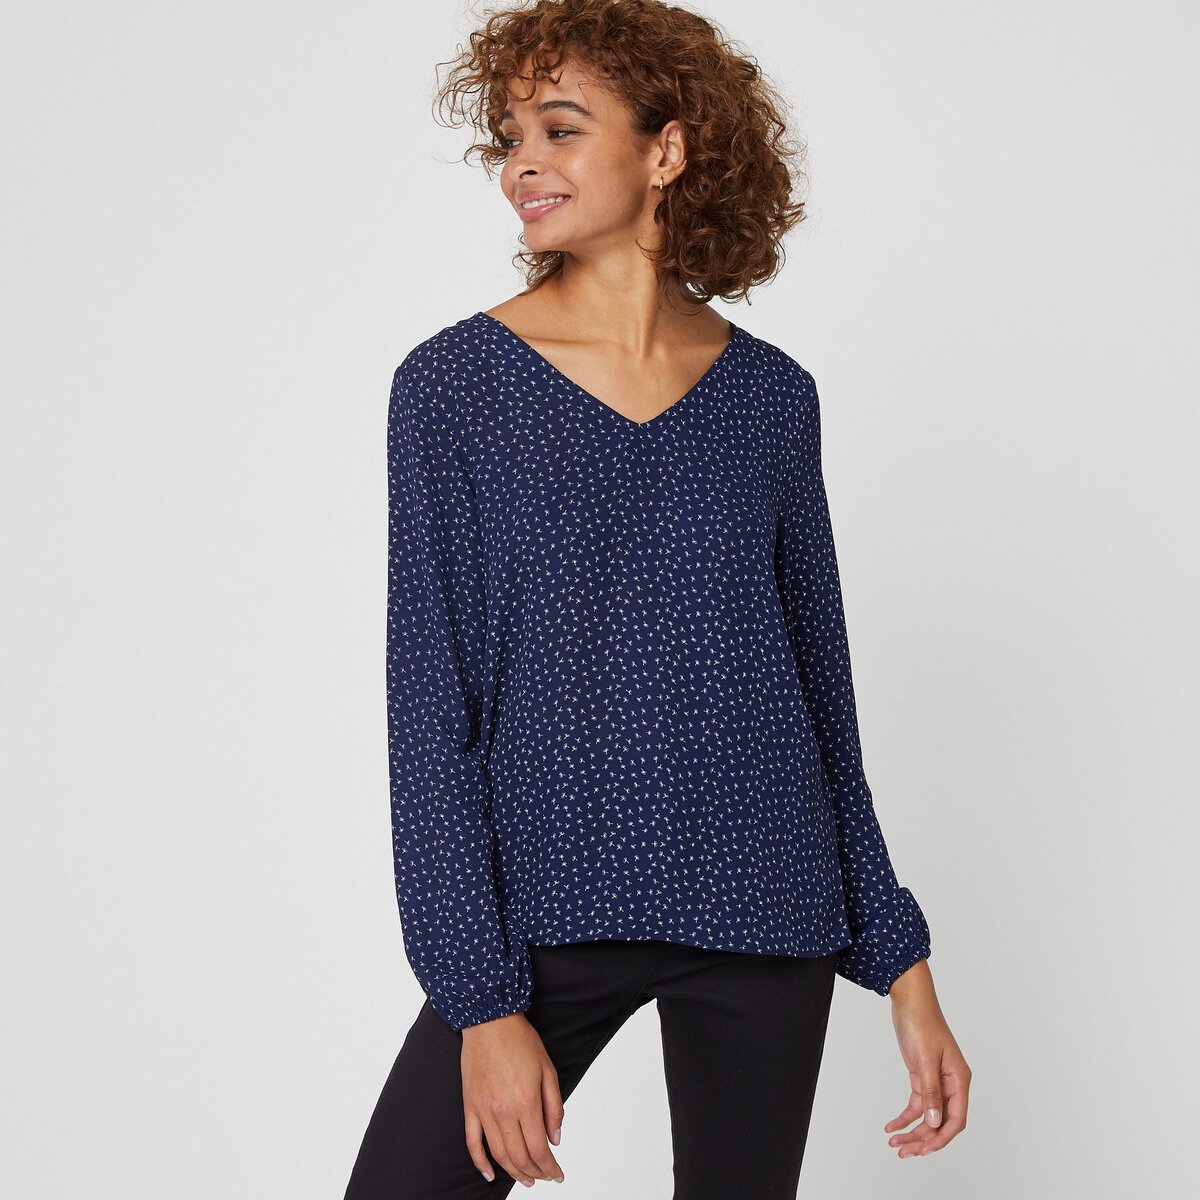 IN EXTENSO Blouse manches longues col v bleu marine femme